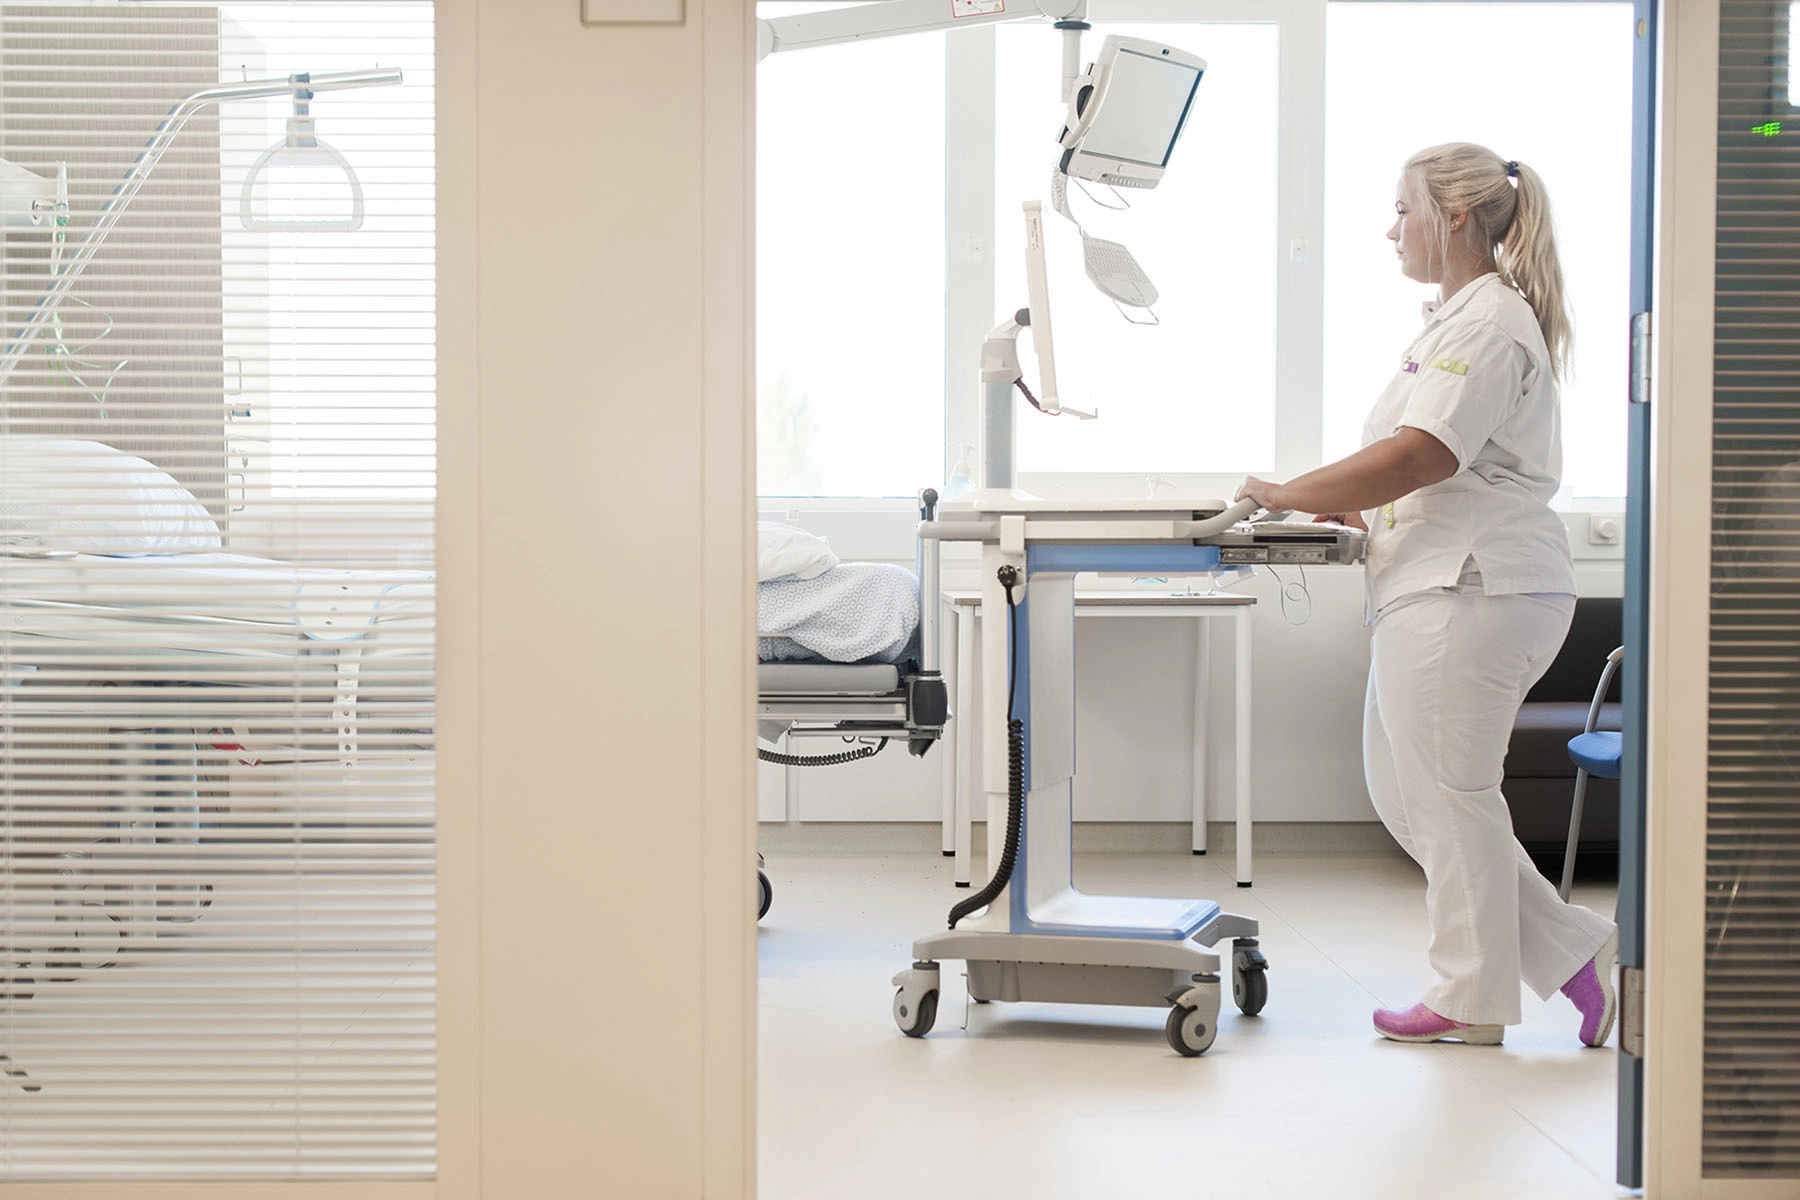 Nurse is wheeling a cart with a computer to an empty bedside.